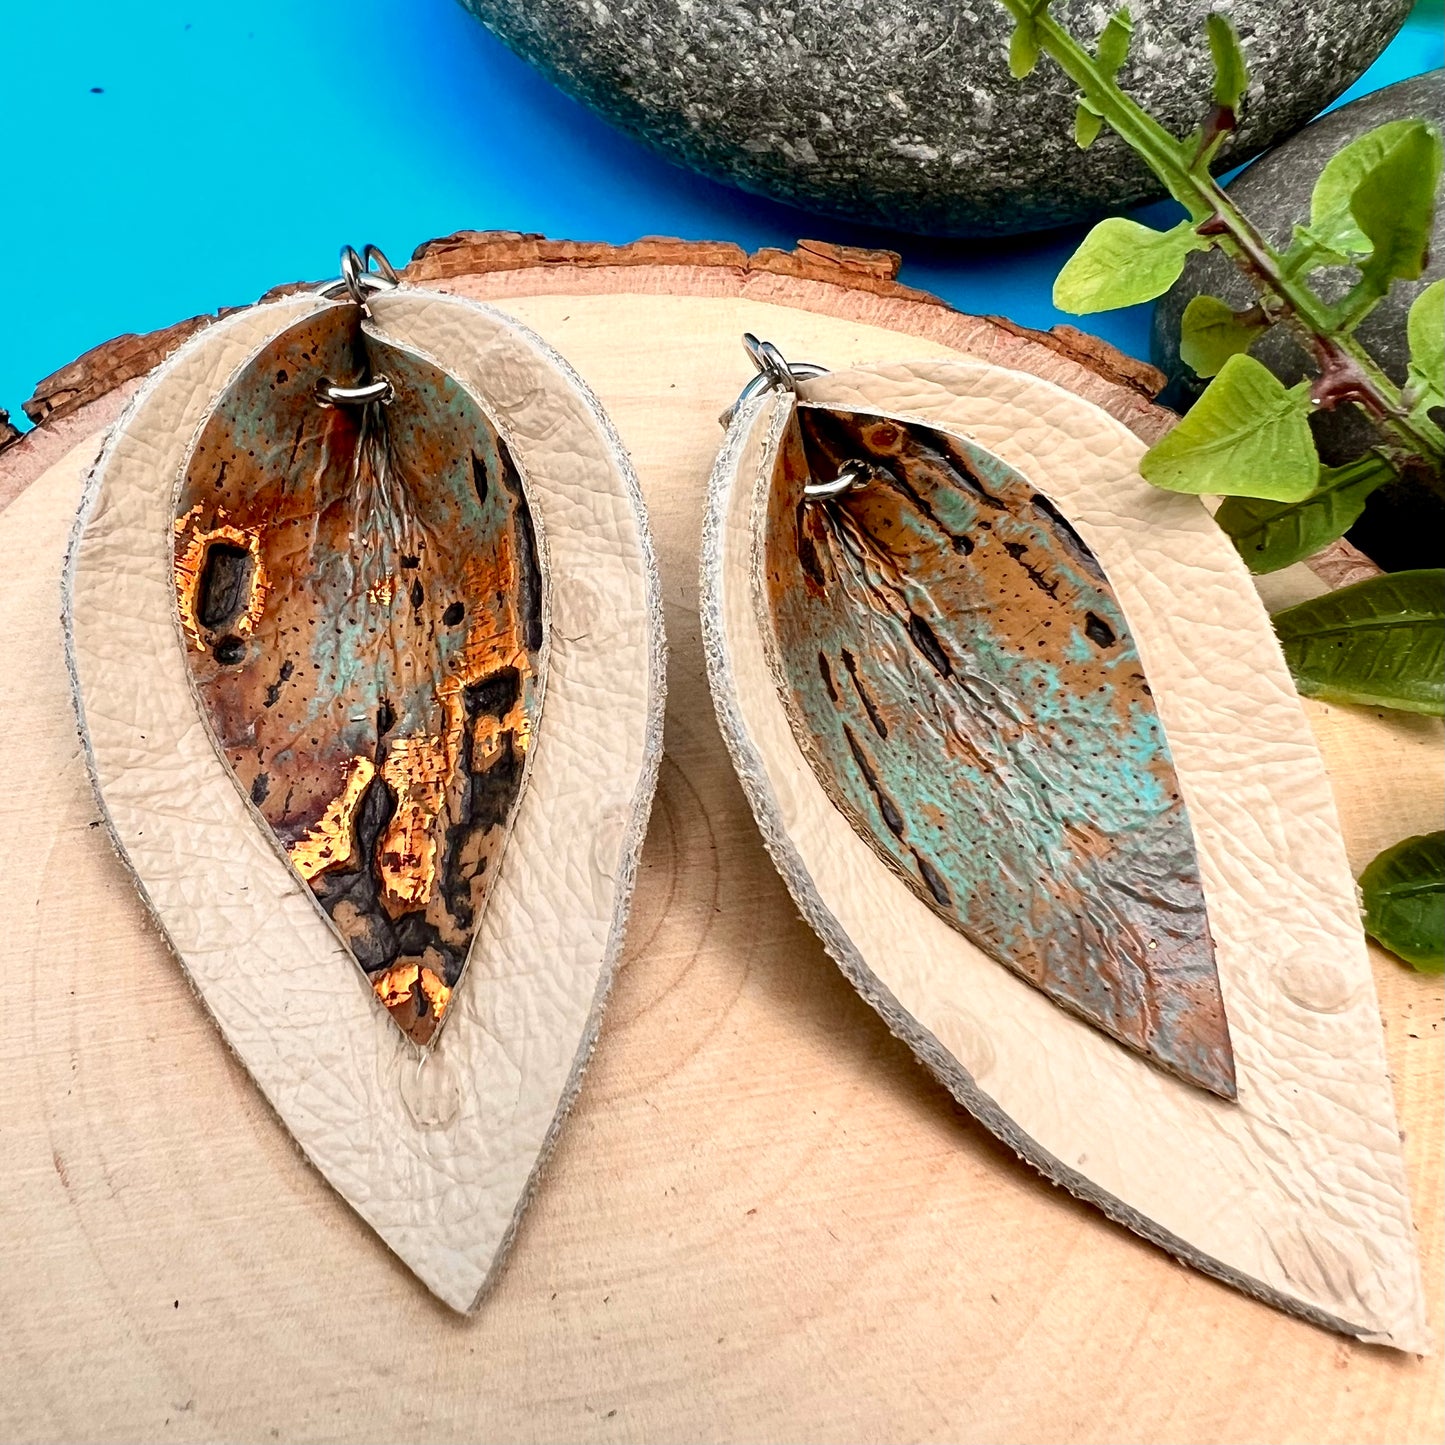 Layered Leather Leaf Earrings - Rustic Copper and Turquoise on Ivory